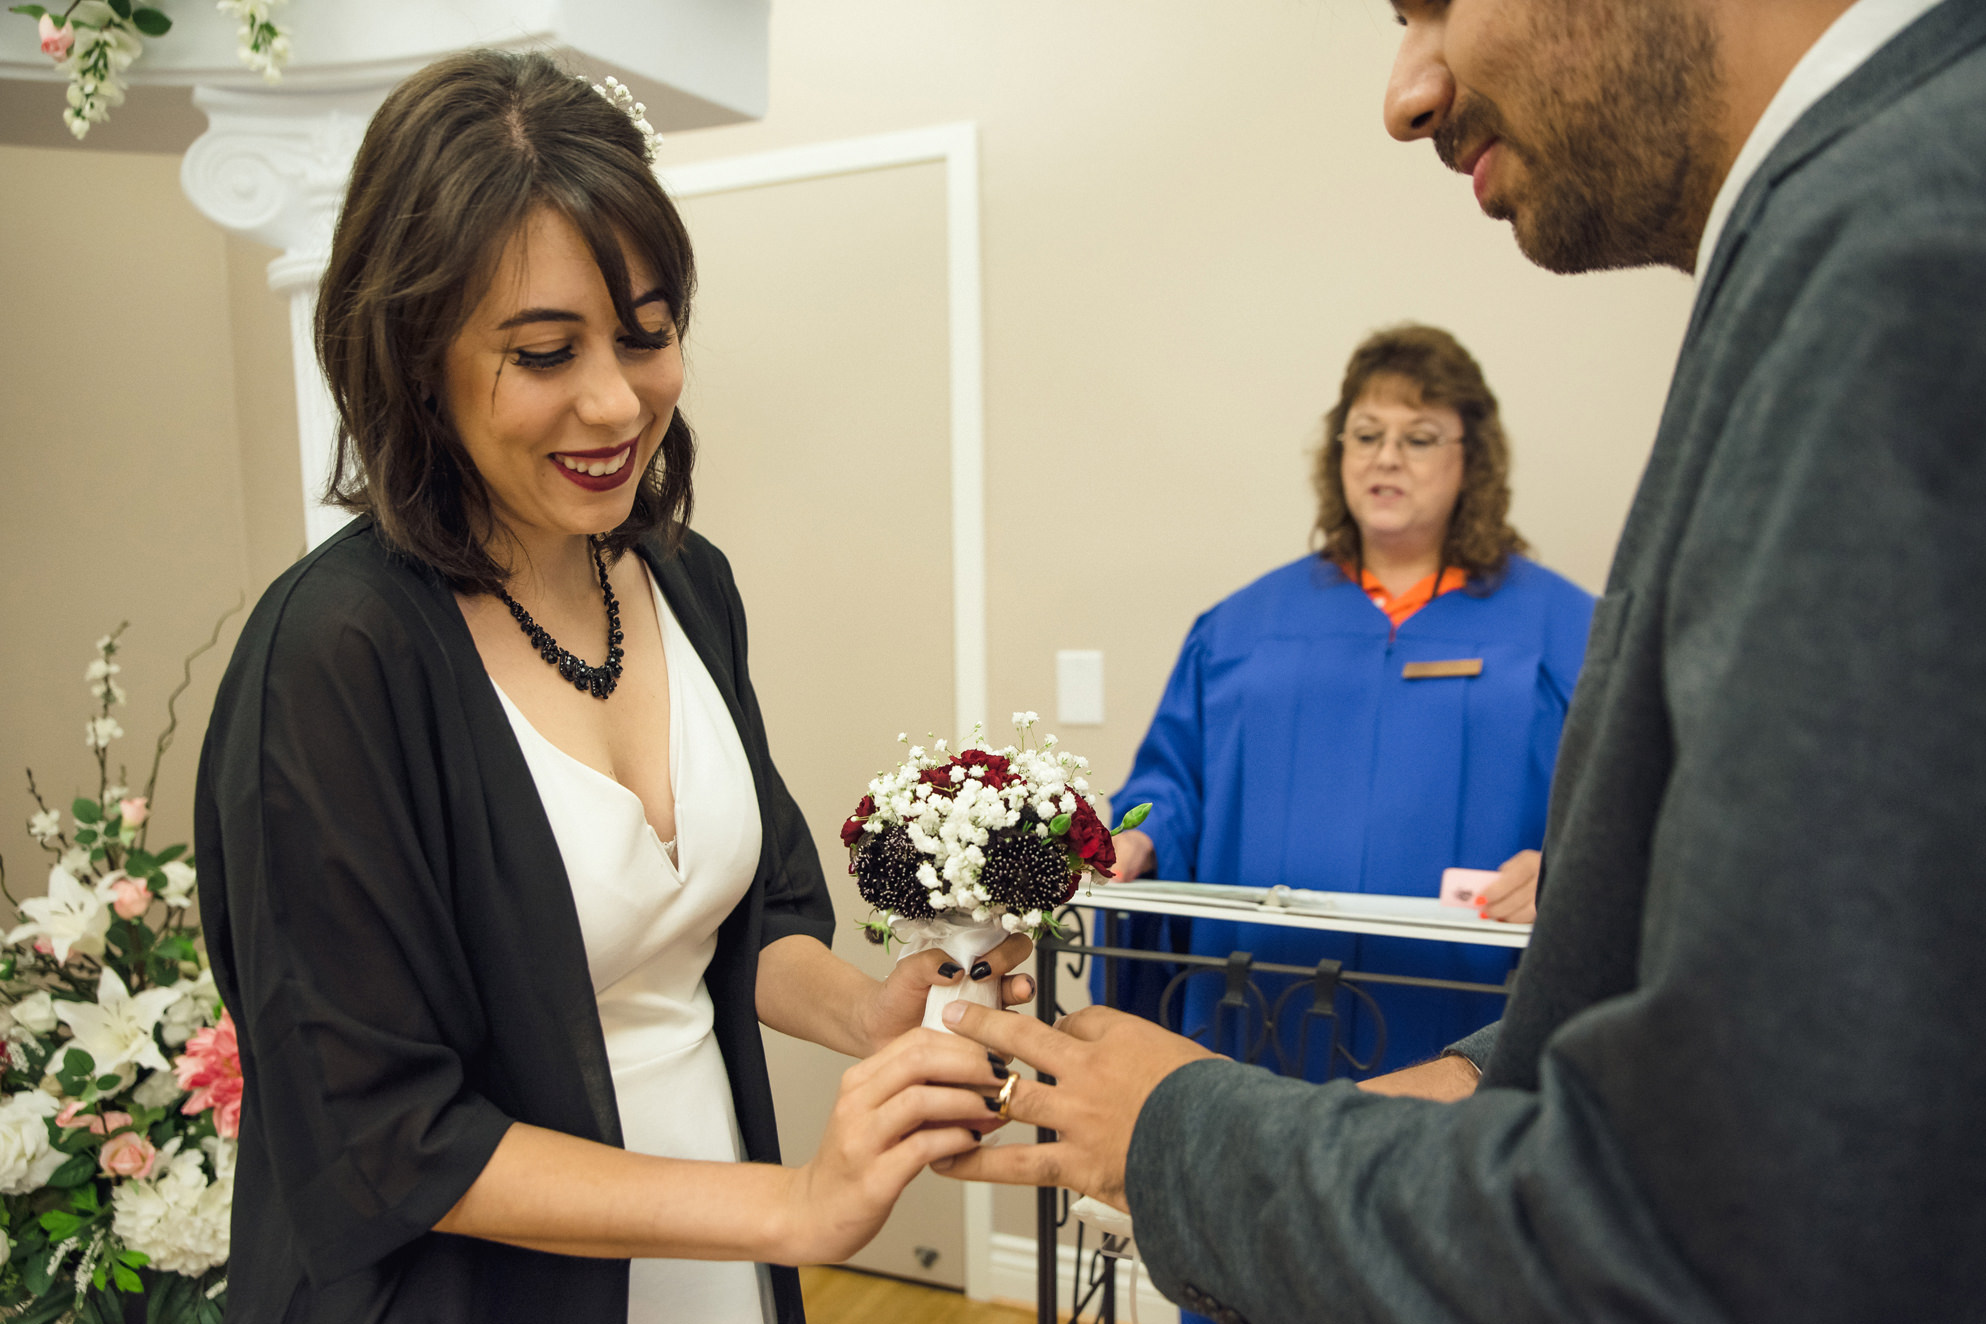 A bride smiling while putting a ring on her husband's finger at a ceremony at the San Jose Clerk Recording Office backyard